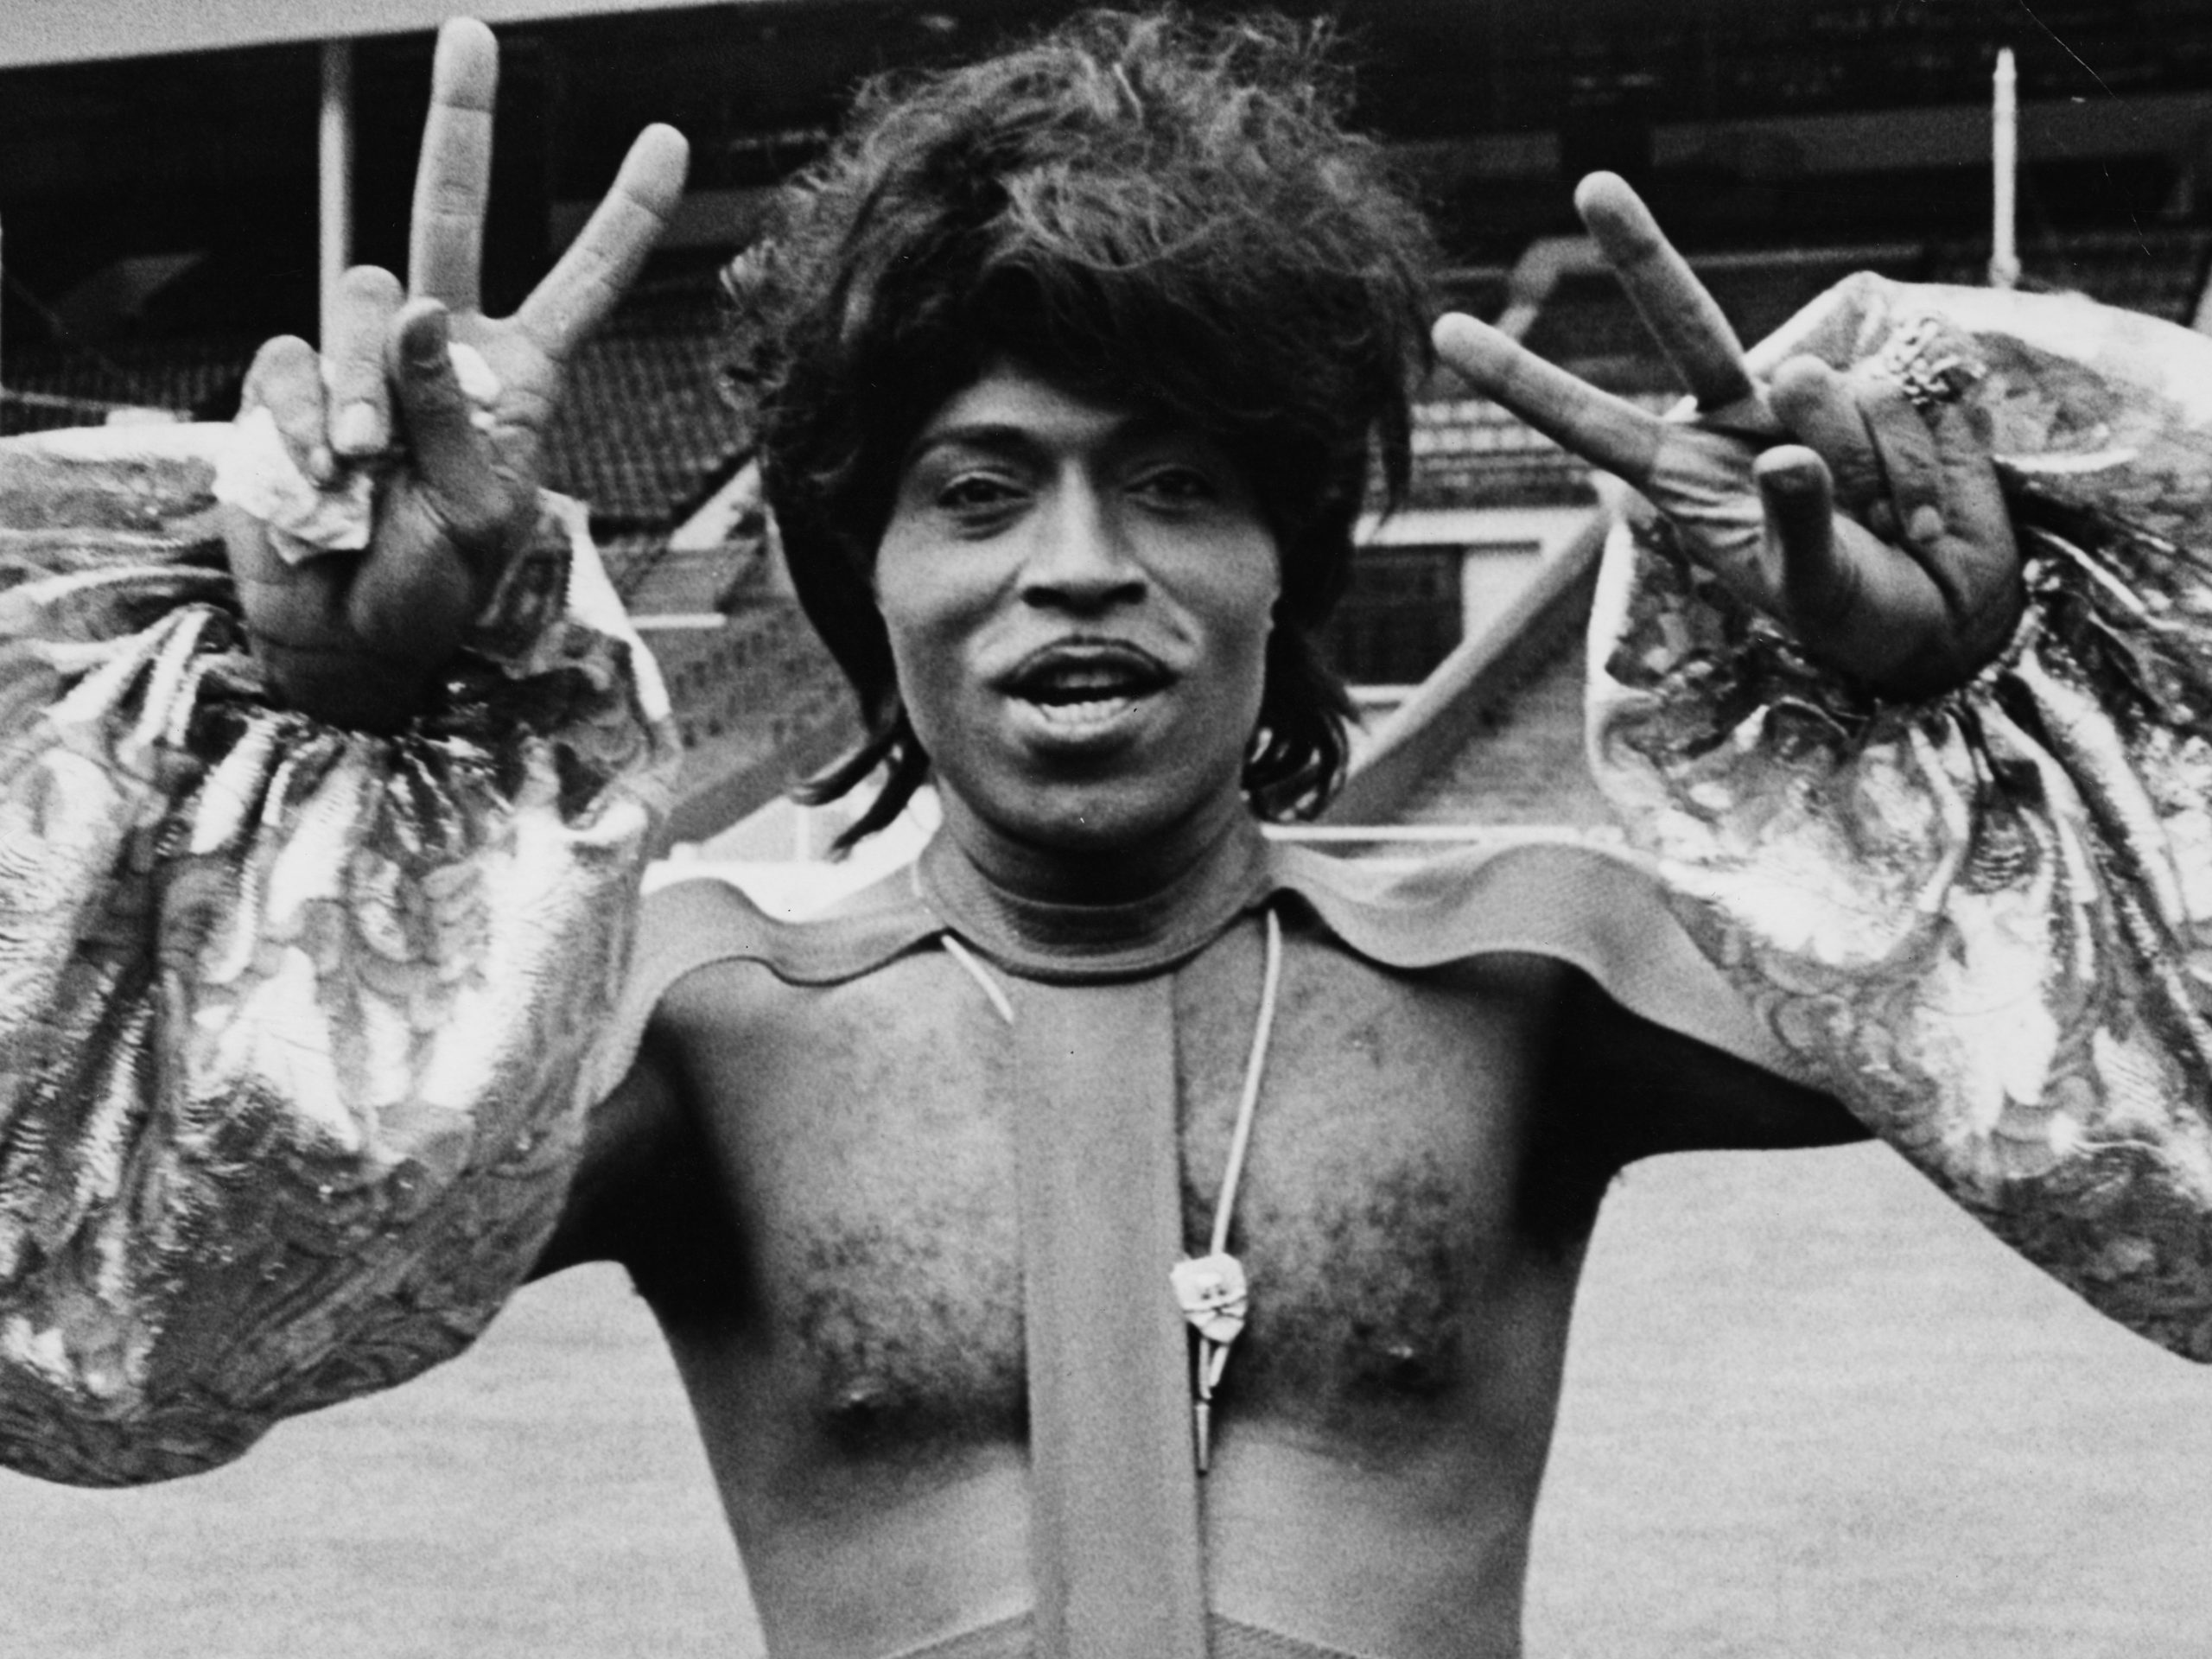 Singer Little Richard making peace sign and wearing an outlandish outfit as he prepares to perform at Wembley Stadium, 1972. (Photo by Rosemary Matthews/Keystone Features/Getty Images)